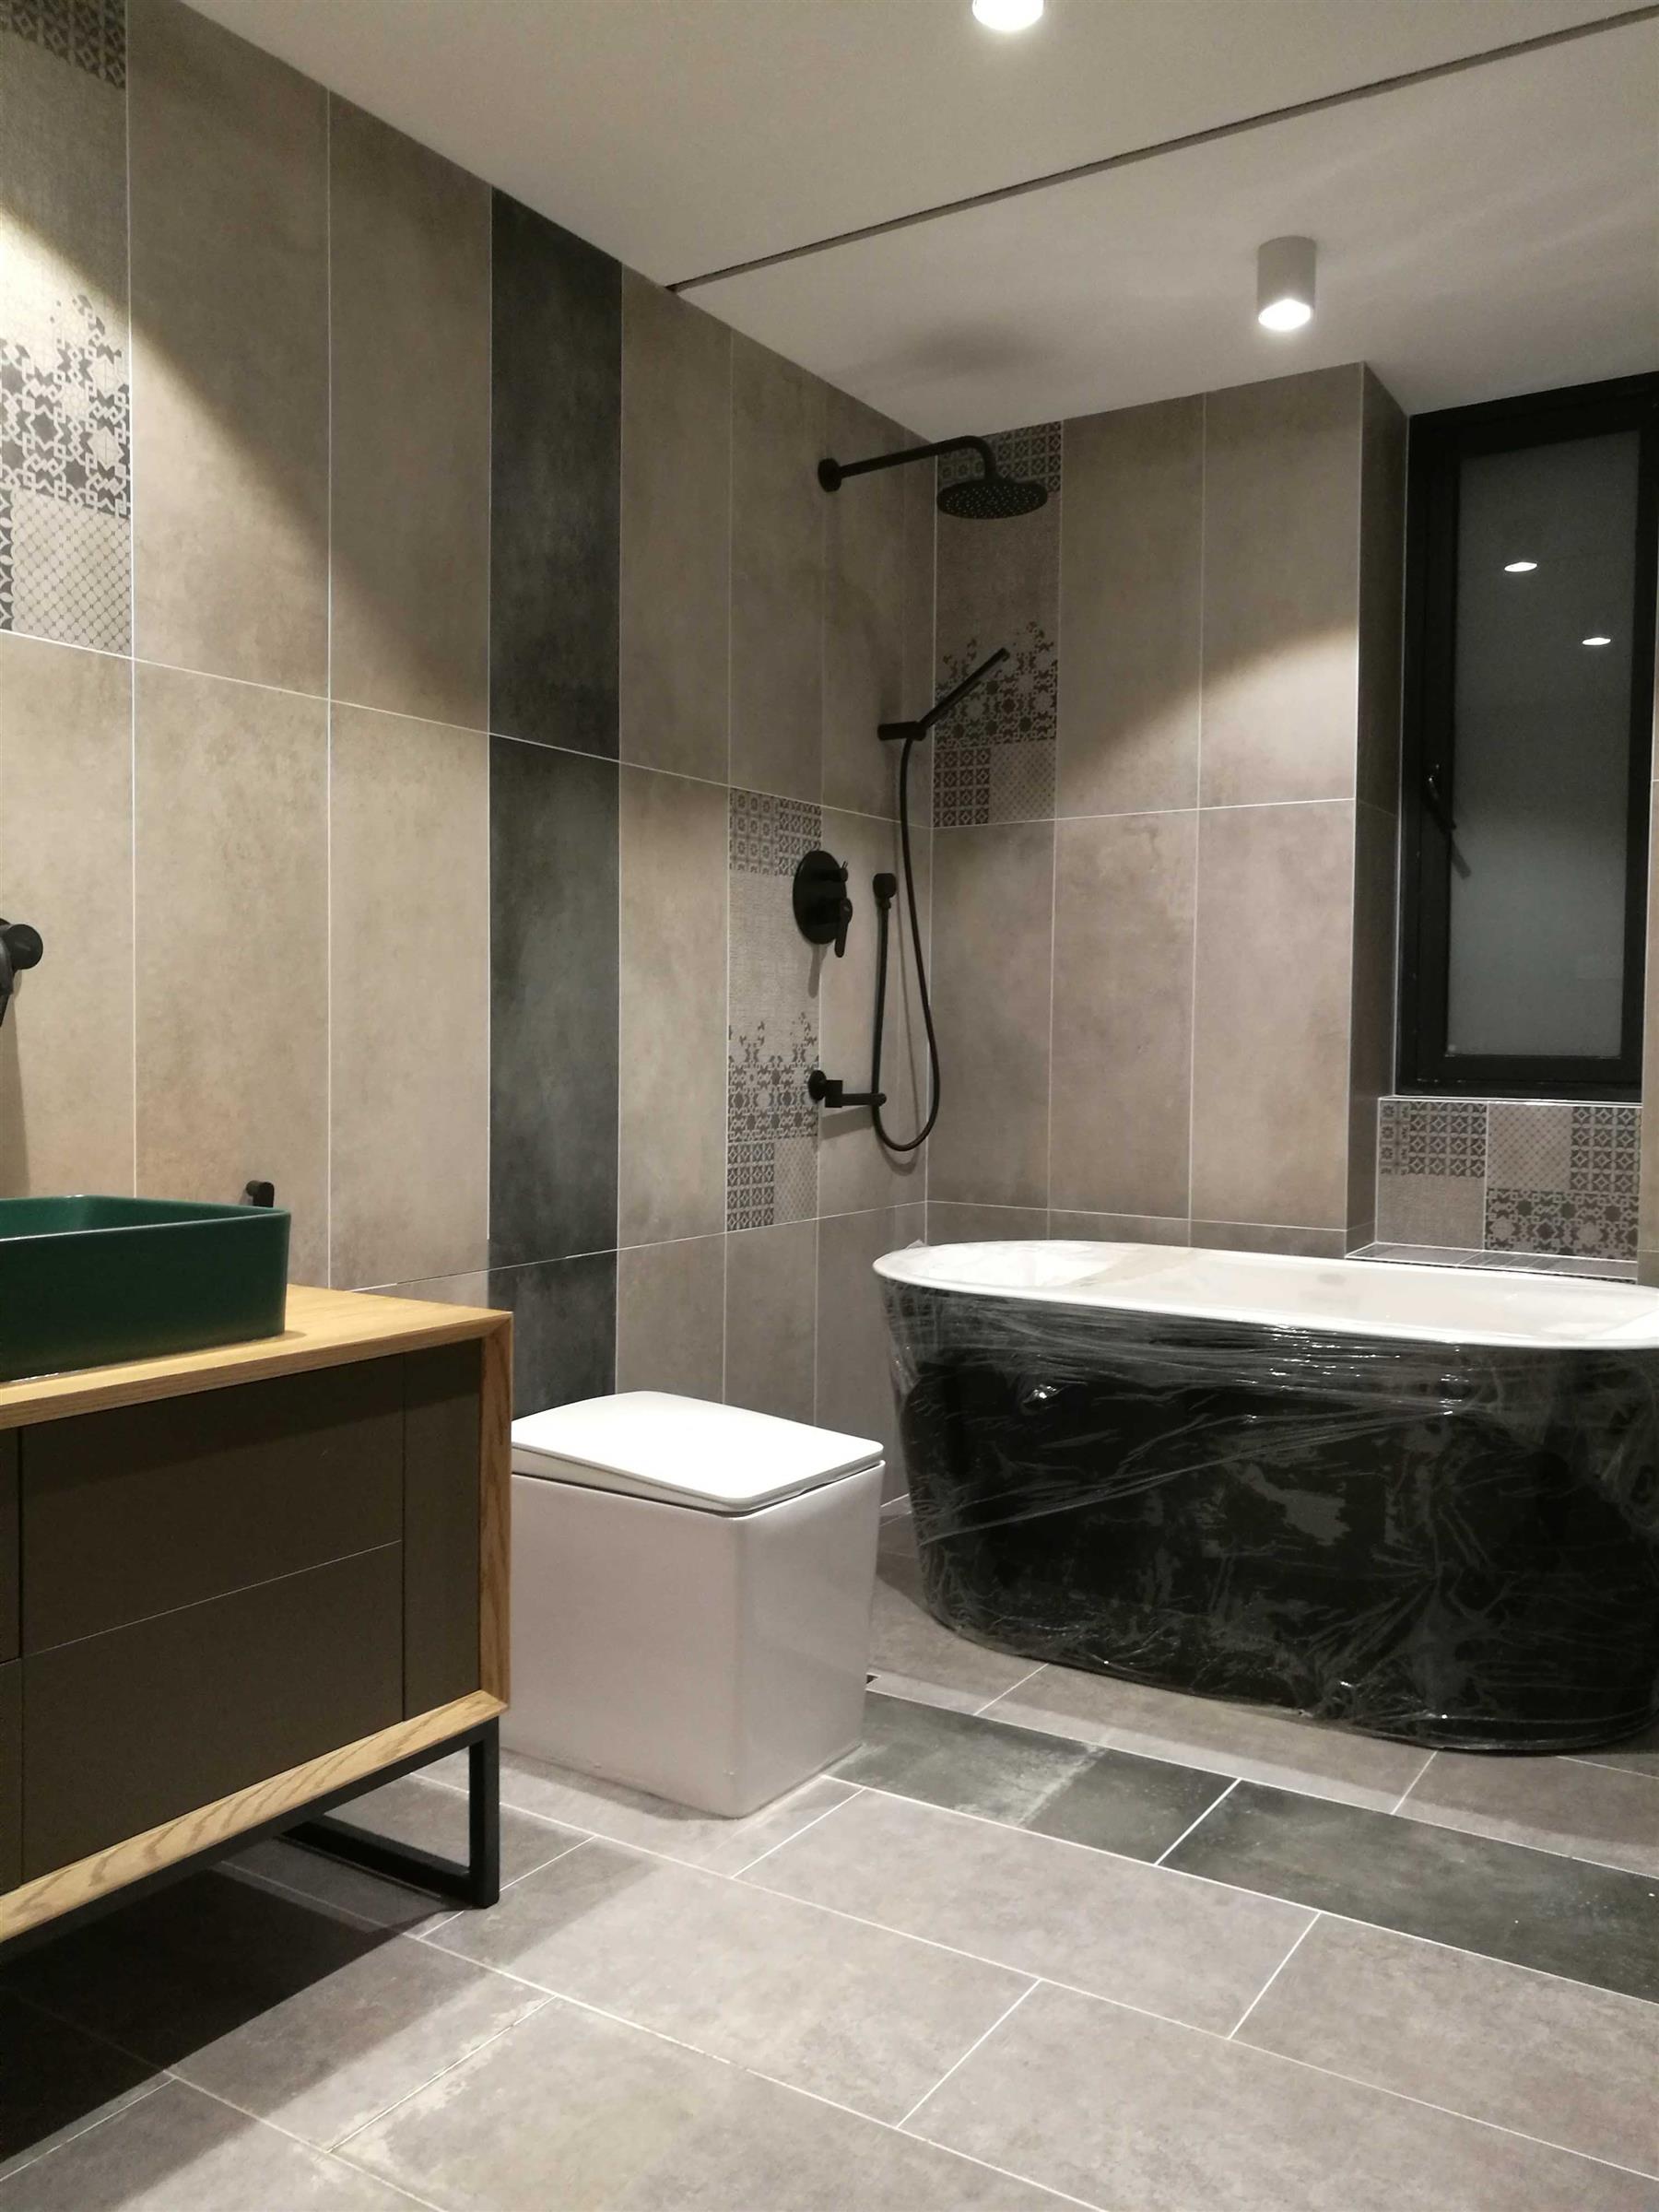 Japanese Bathtub Brand-New Top-End Spacious Open Xinhua Rd Apt for Rent in Shanghai